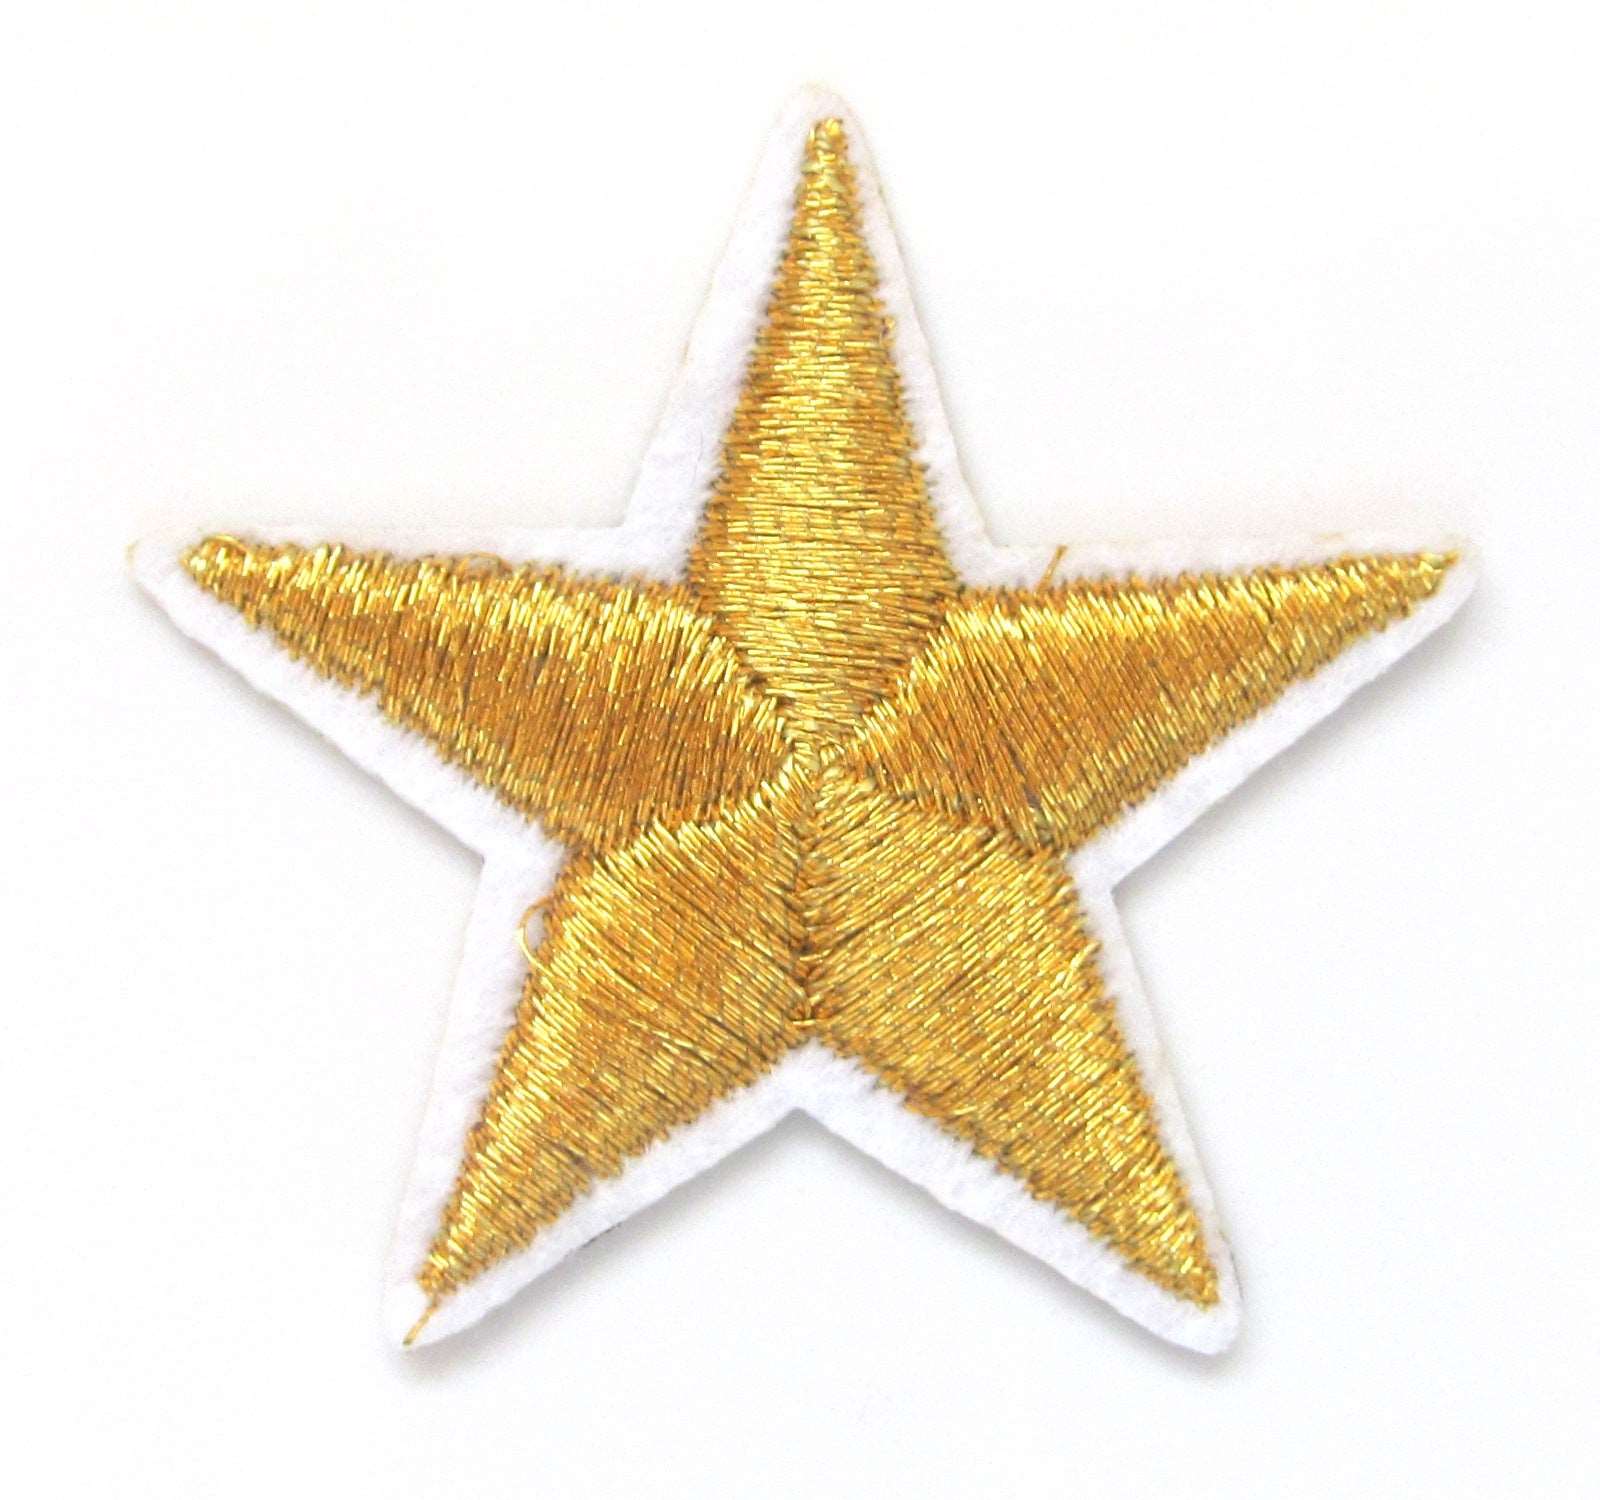 One inch Star Patches, Embroidered 1 inch Star Patch Iron on Appliques in 13 Colors, High Quality Patch Material Can Also Be Sewn on or Glued On, Gold